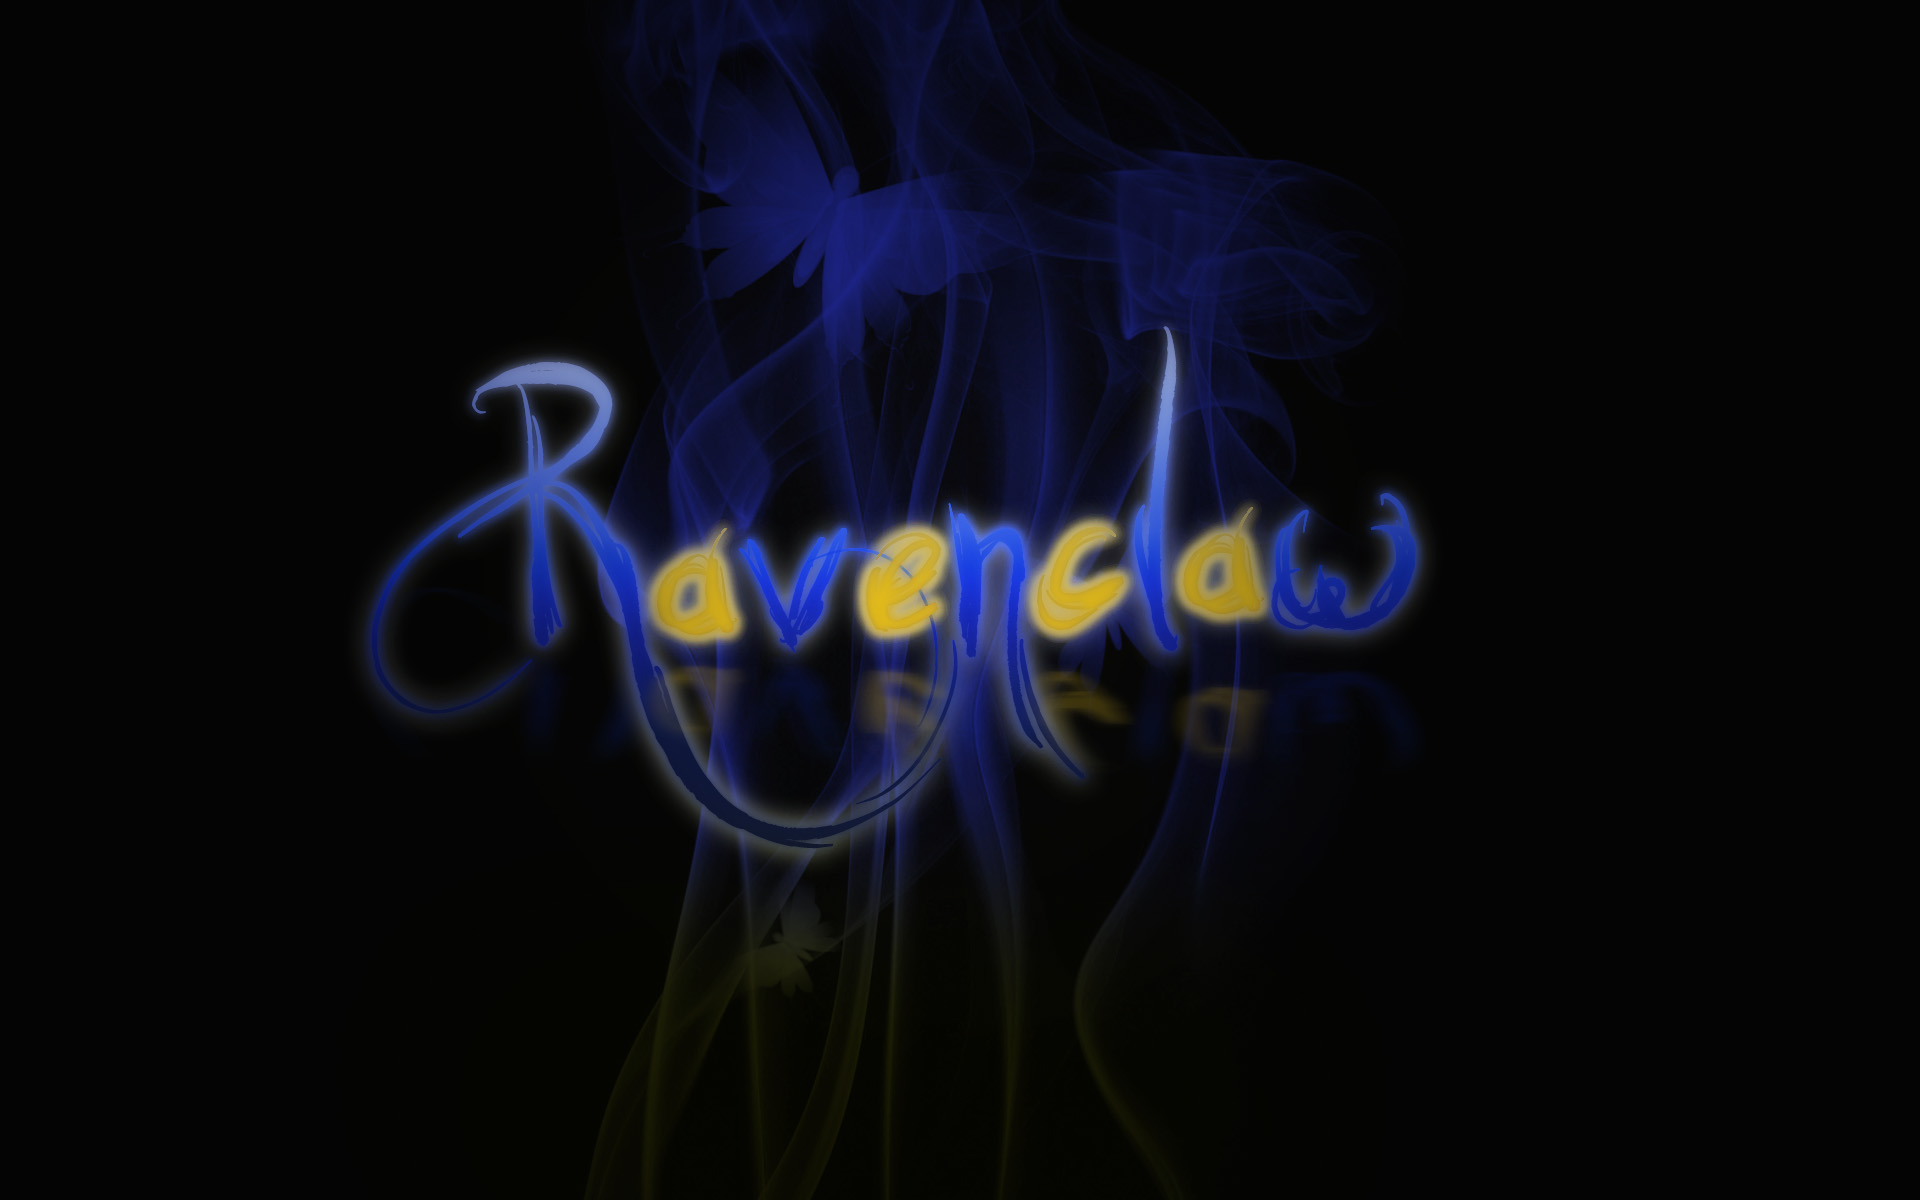 Harry Potter Iphone Wallpaper Ravenclaw Ravenclaw wallpaper by 1920x1200